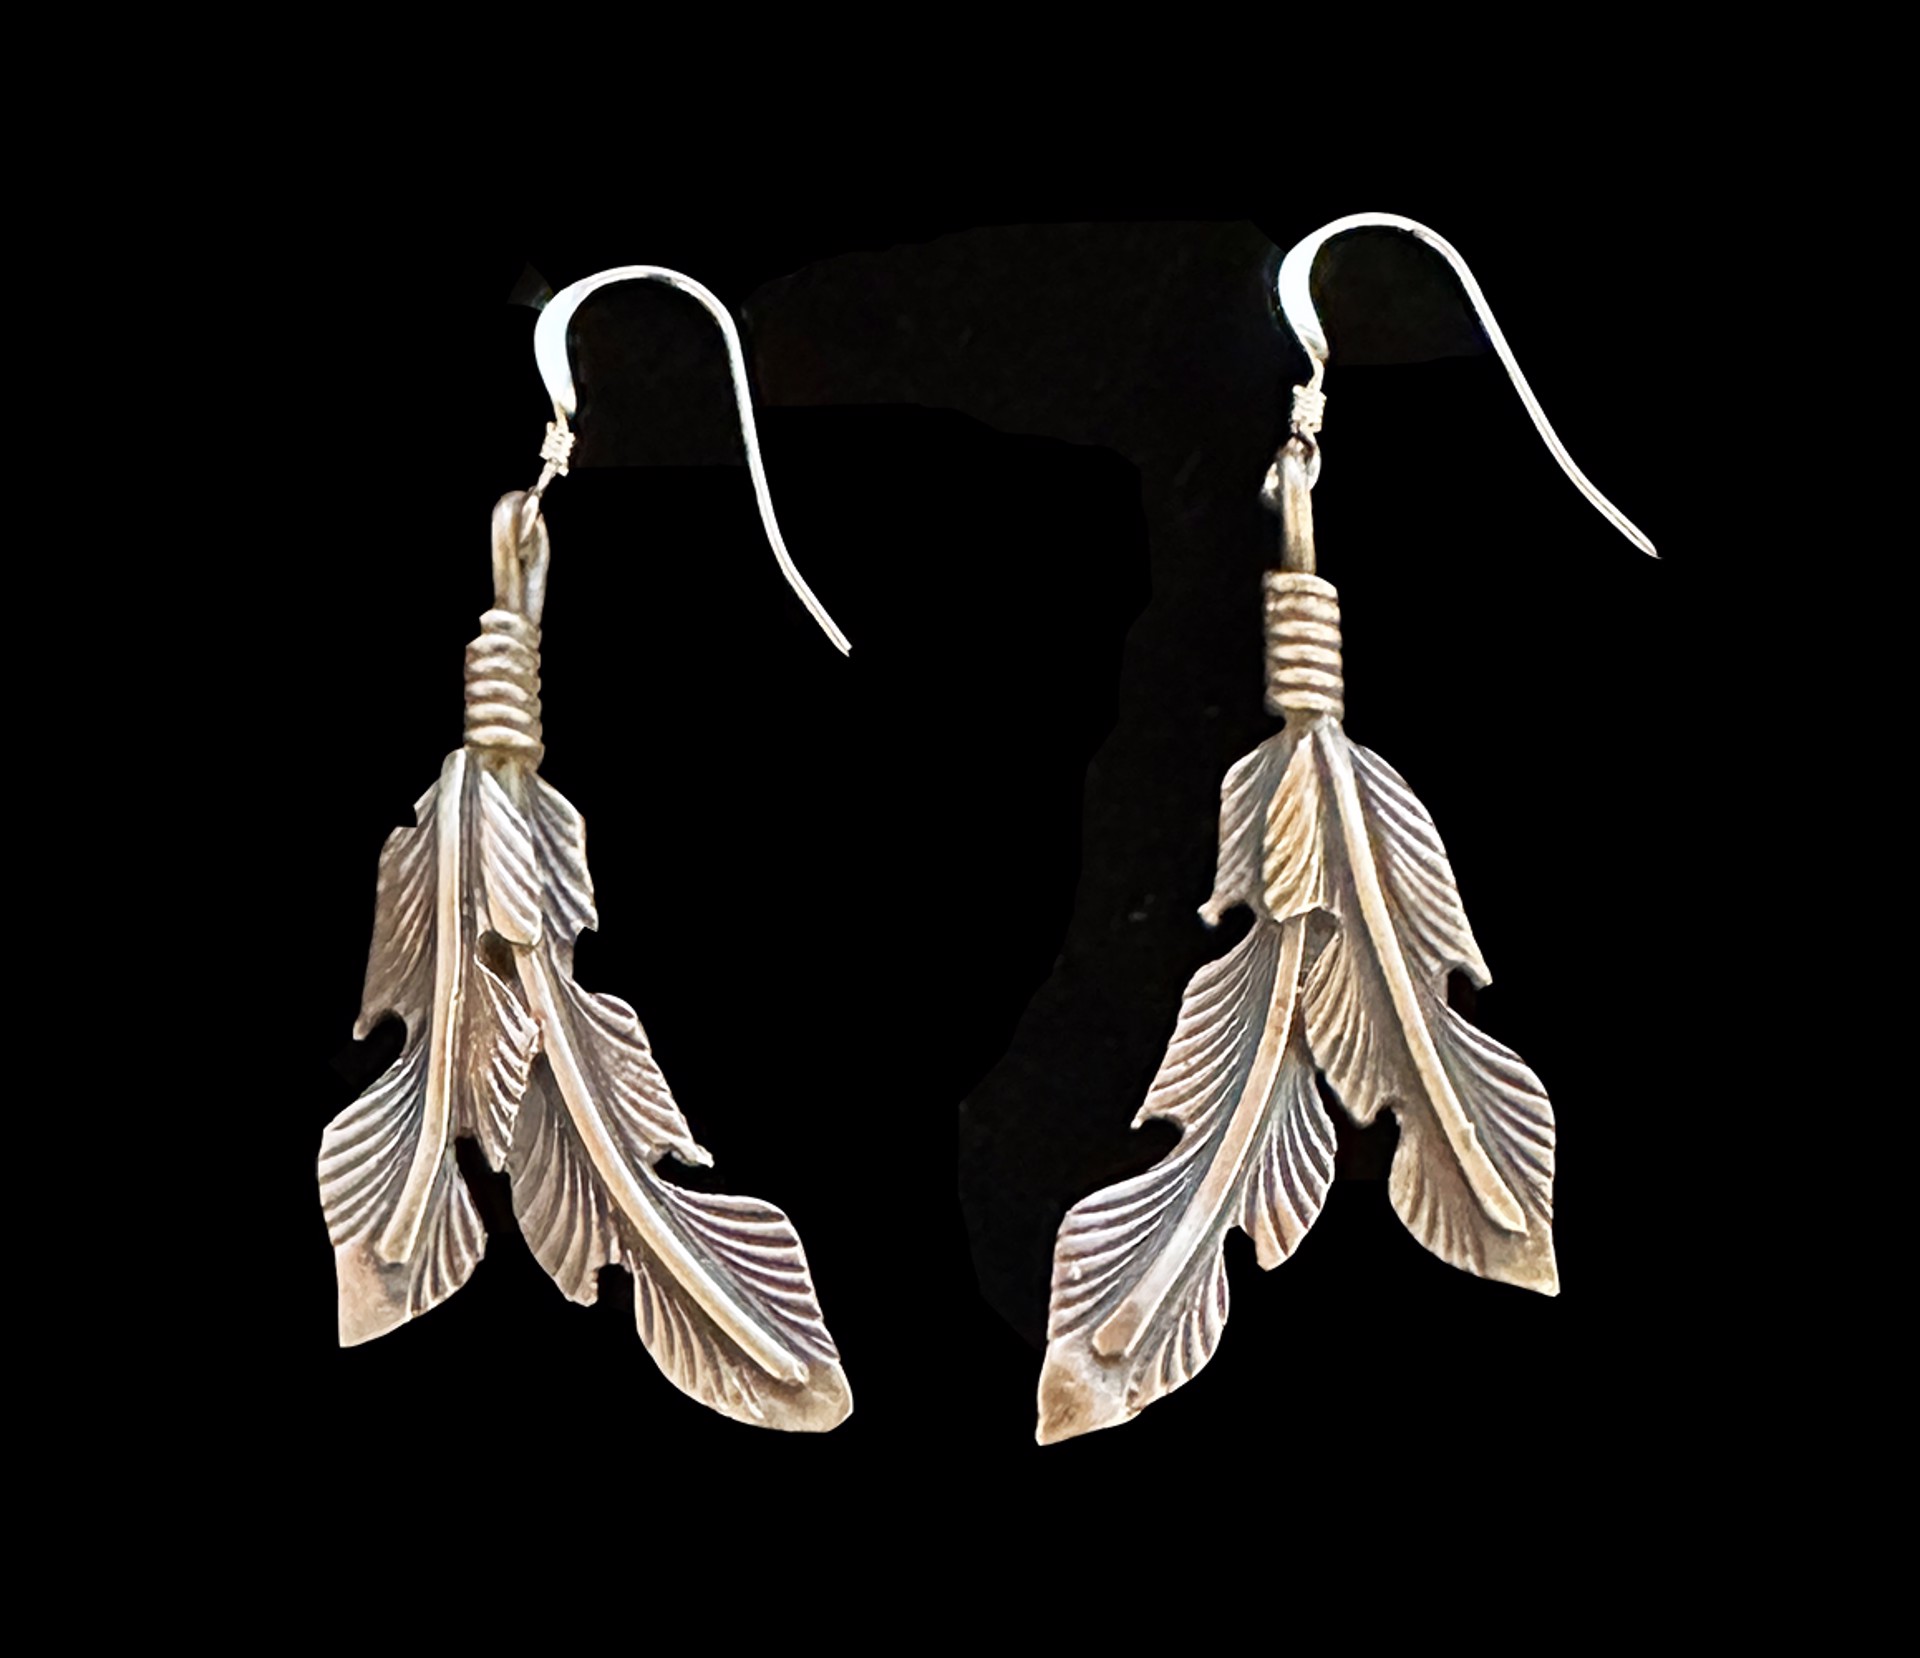 Handmade Navajo Sterling Silver Feather Earrings by Artist Unknown